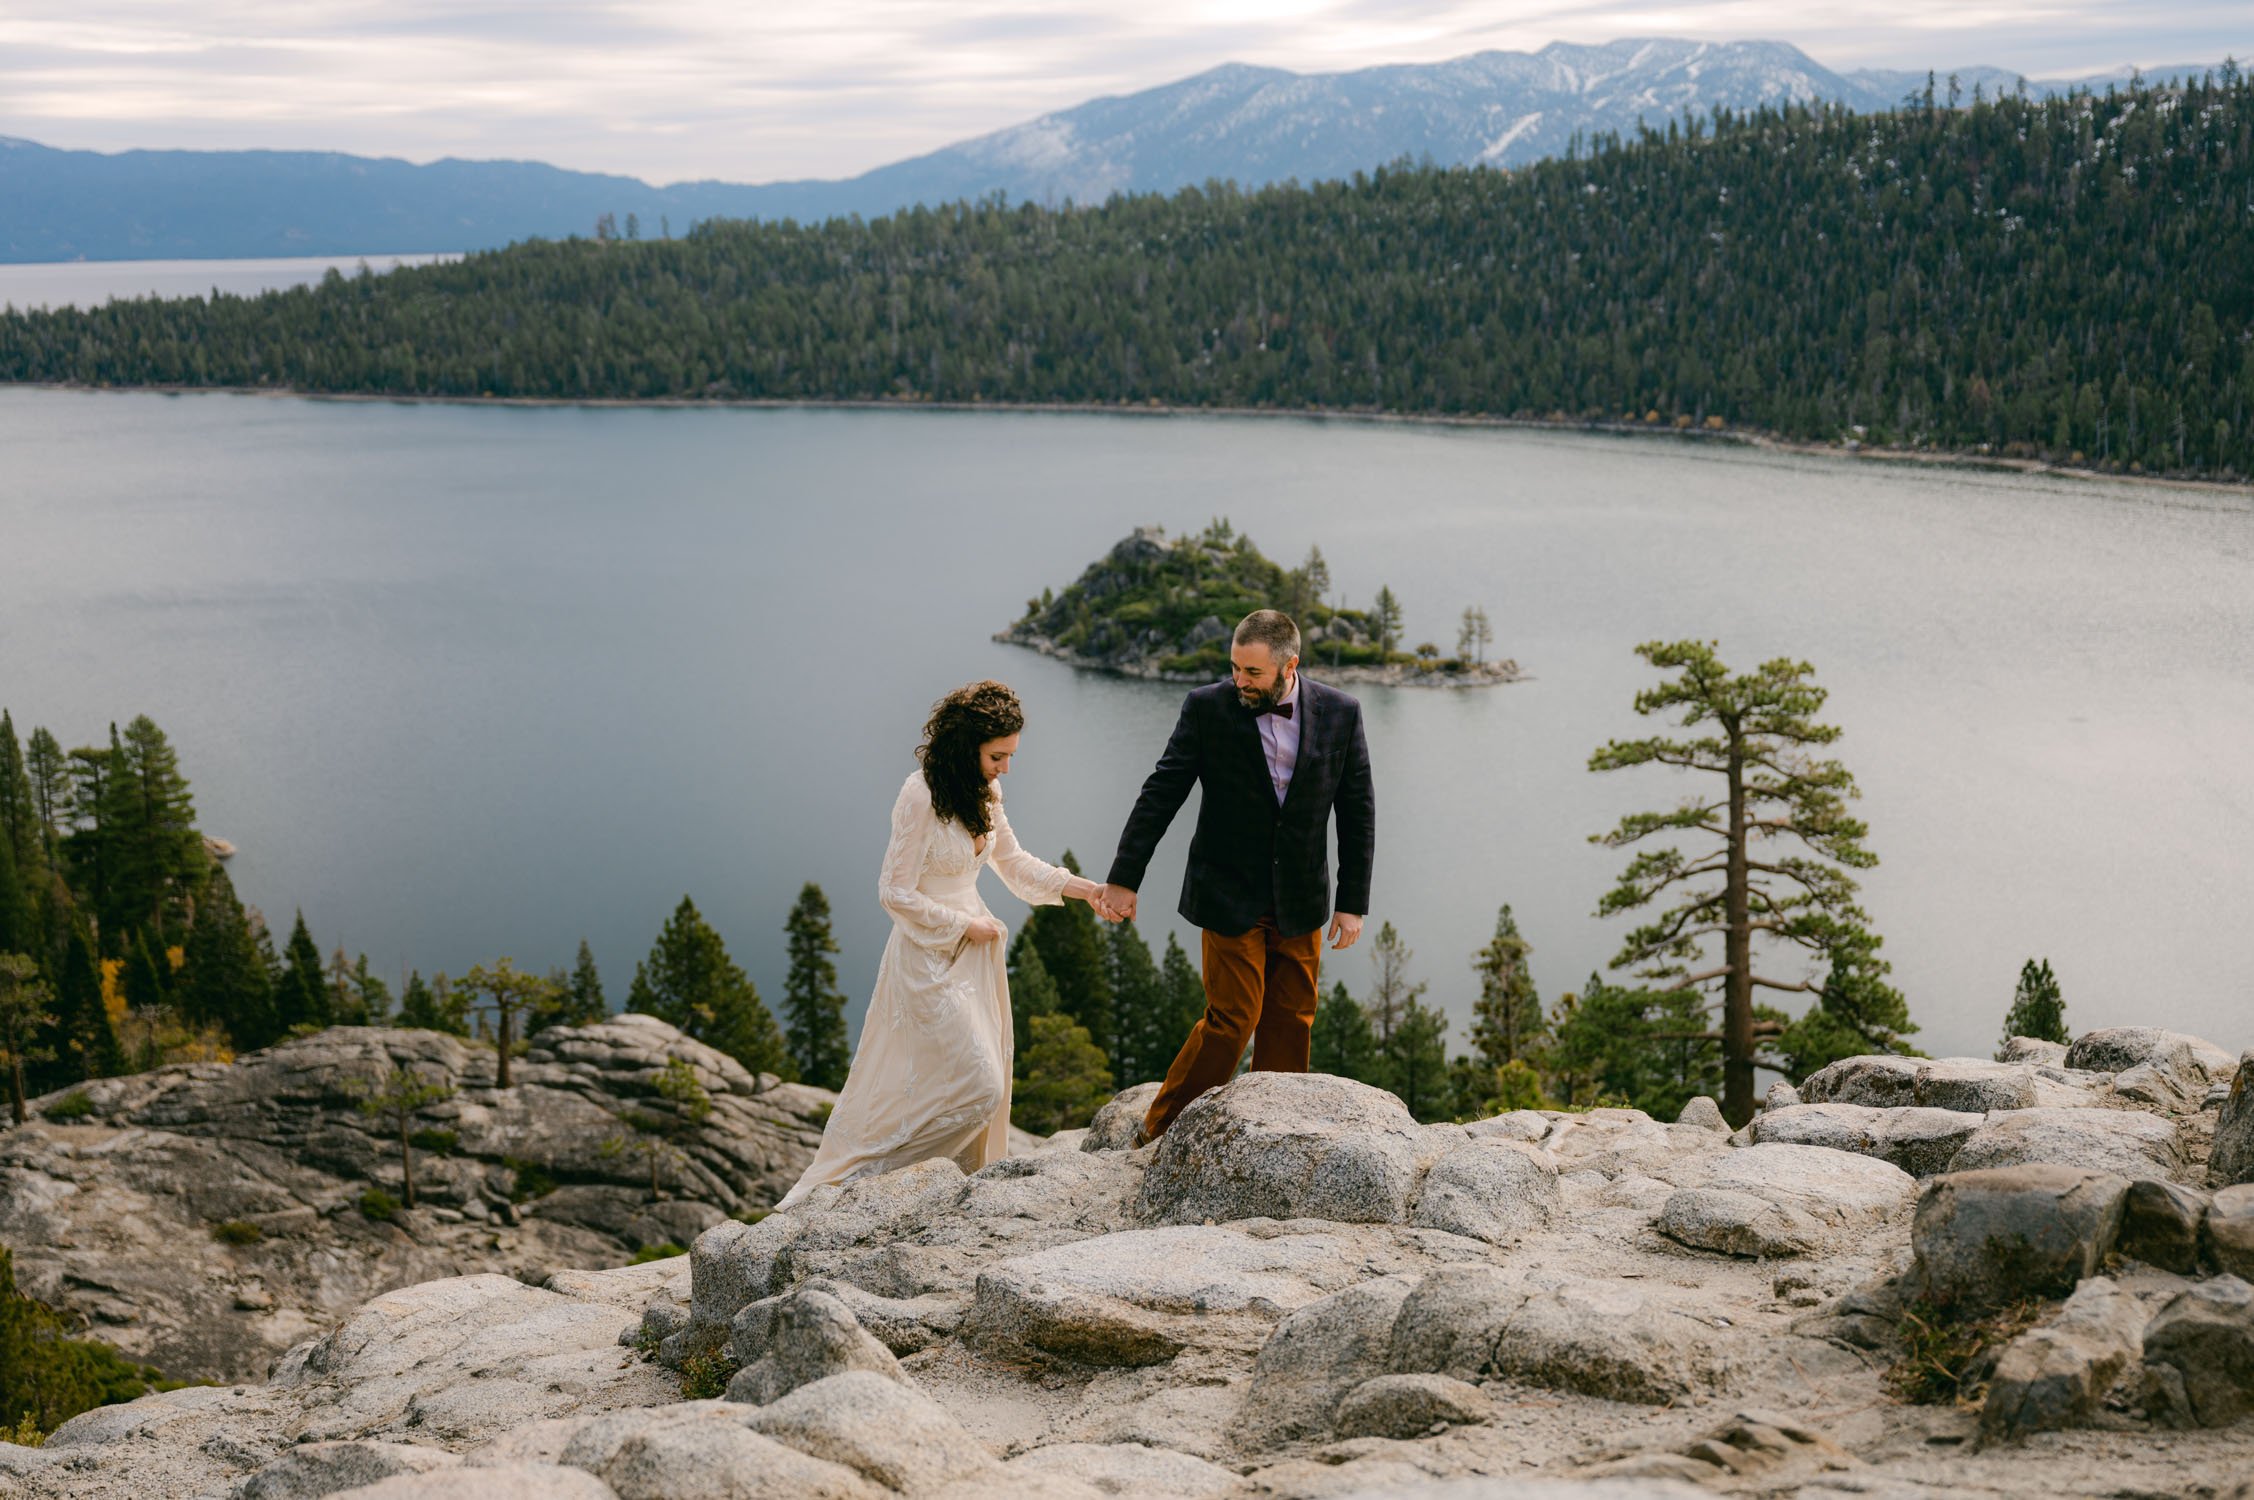  Emerald Bay Elopement Photographer, photo of a couple holding hands and walking at an overlook 